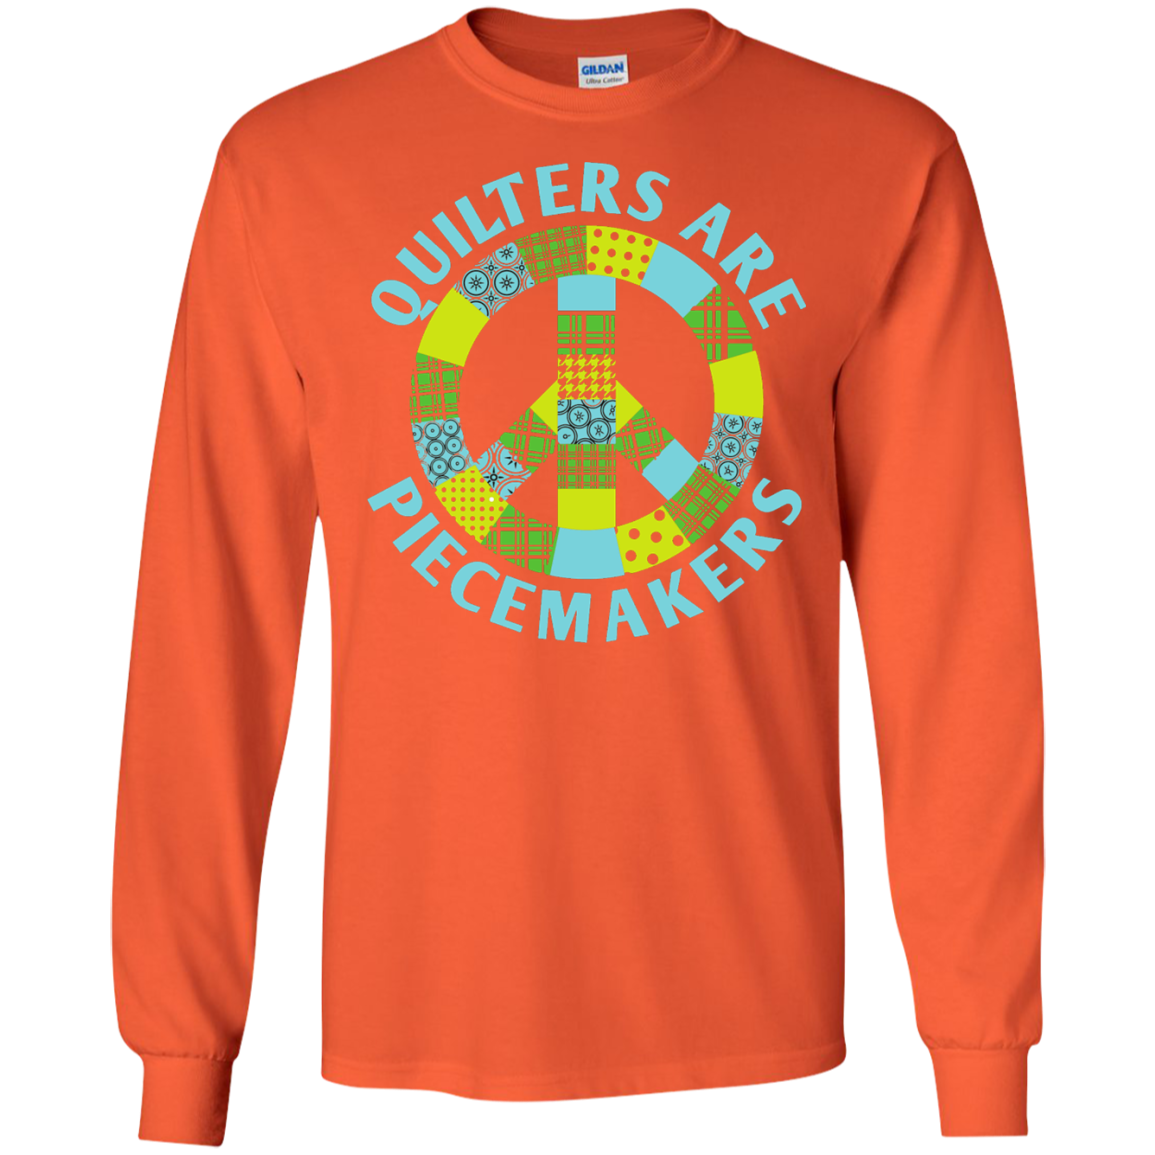 Quilters are Piecemakers Long Sleeve Ultra Cotton T-Shirt - Crafter4Life - 1